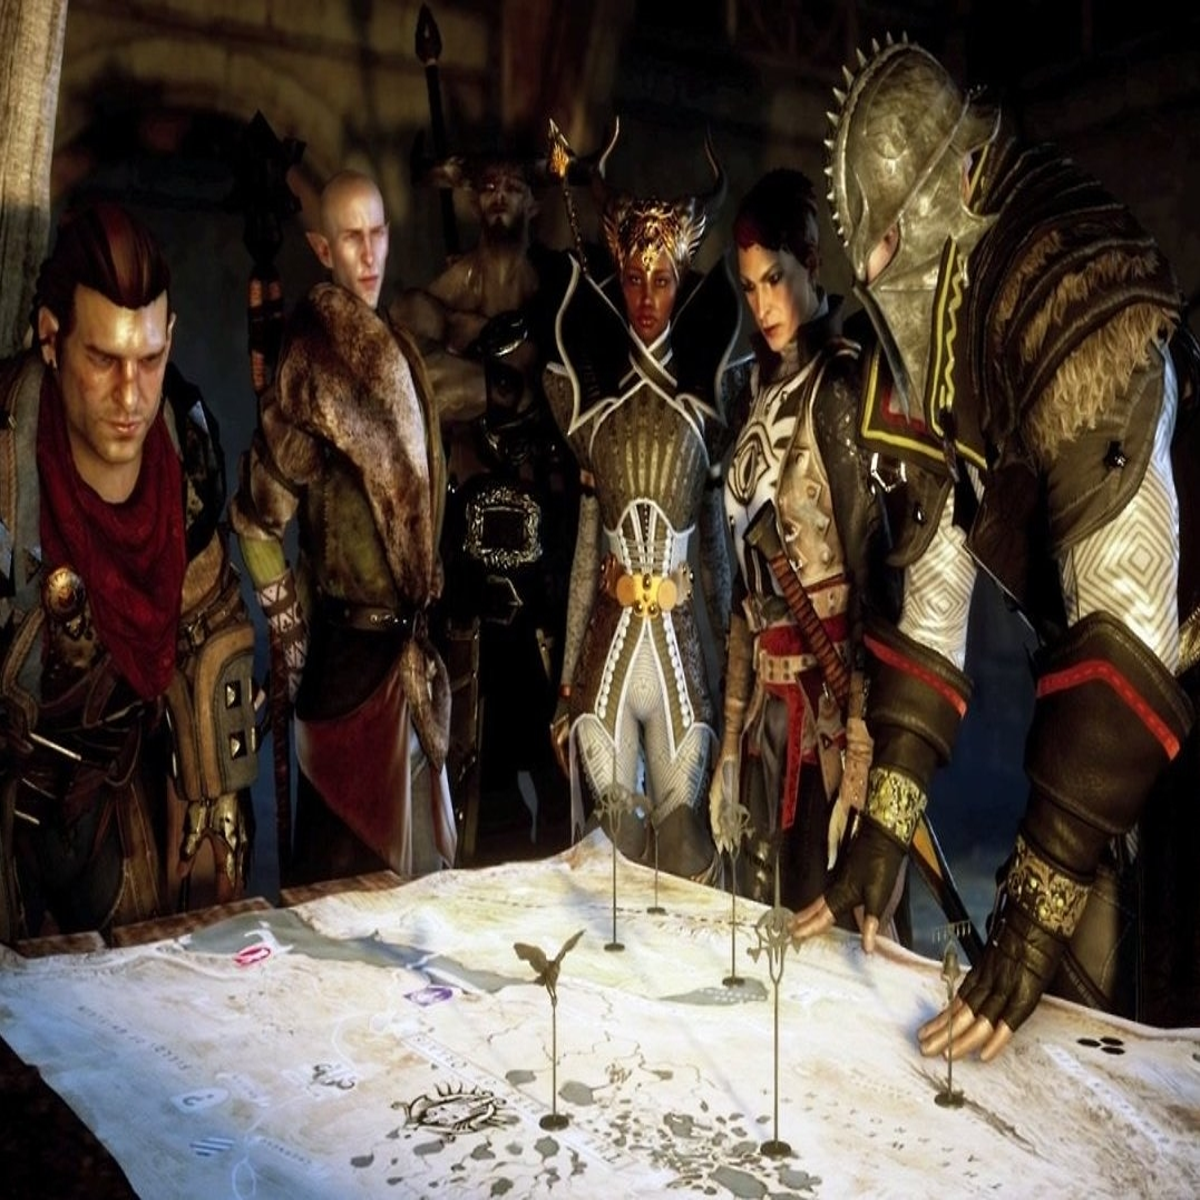 Dragon Age 4 Could Easily Fix the Series' Biggest Romance Criticism